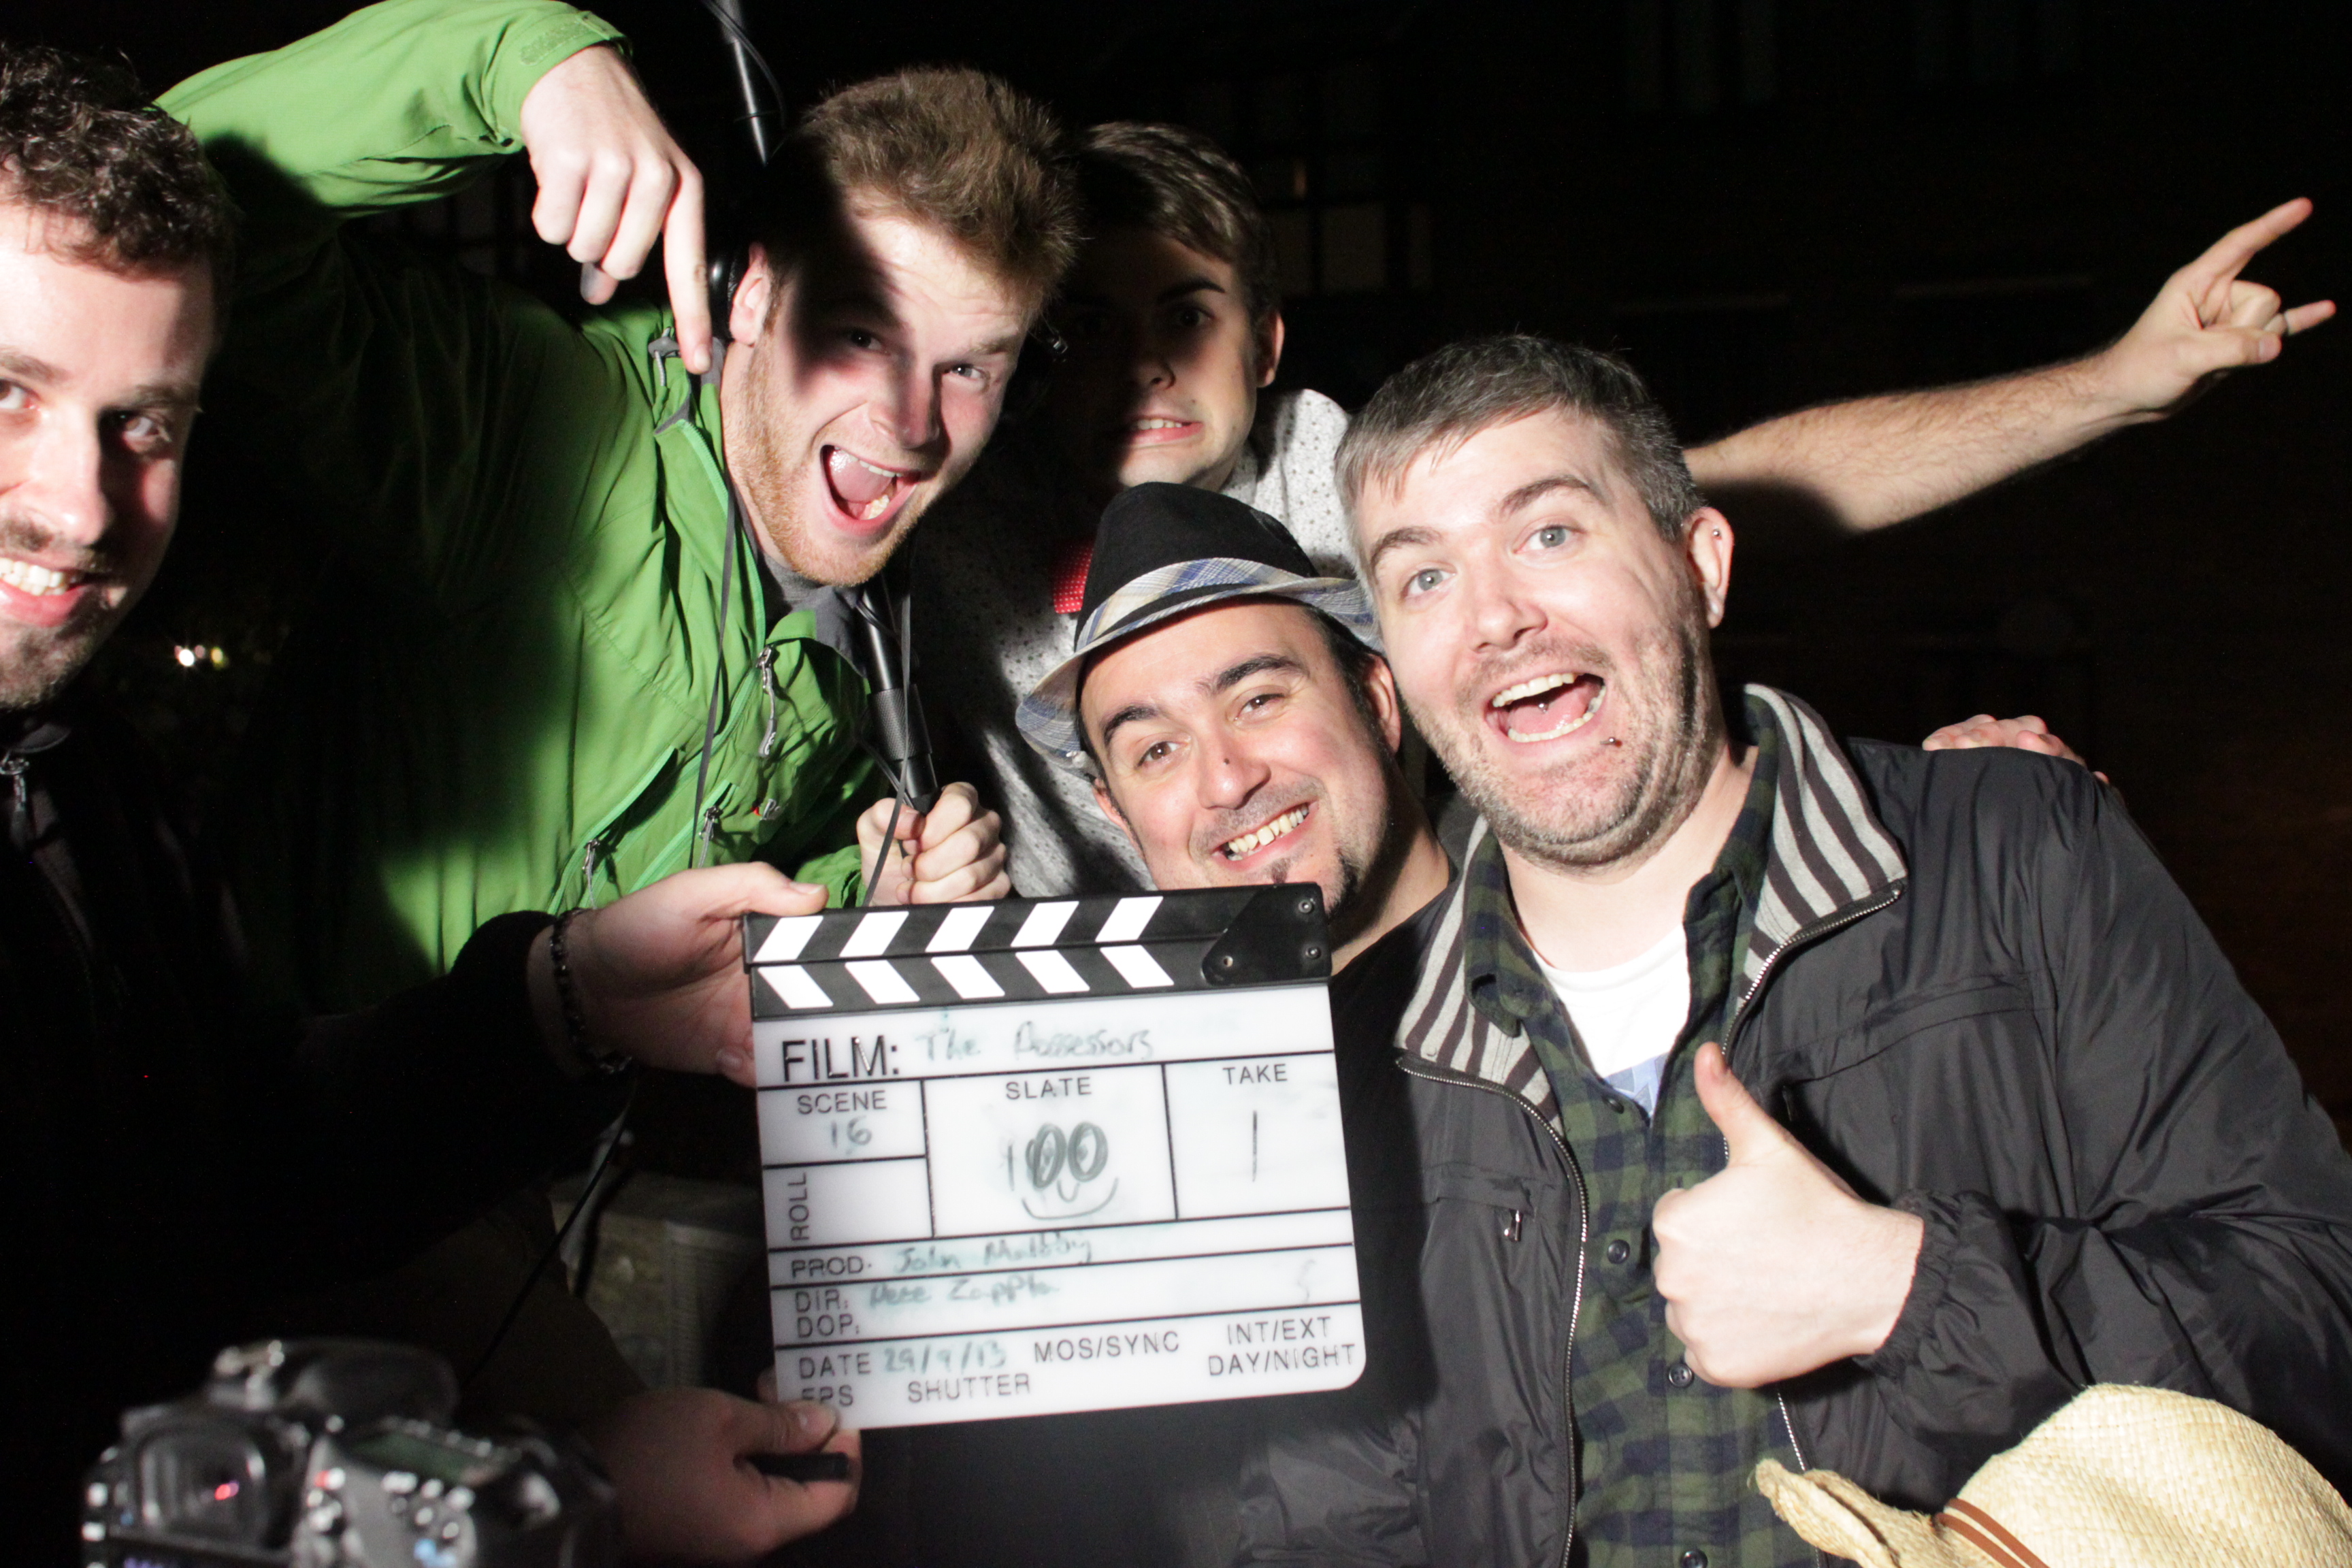 Cast and crew celebrate reaching slate 100 on day 4 of 'The Possessors' shoot